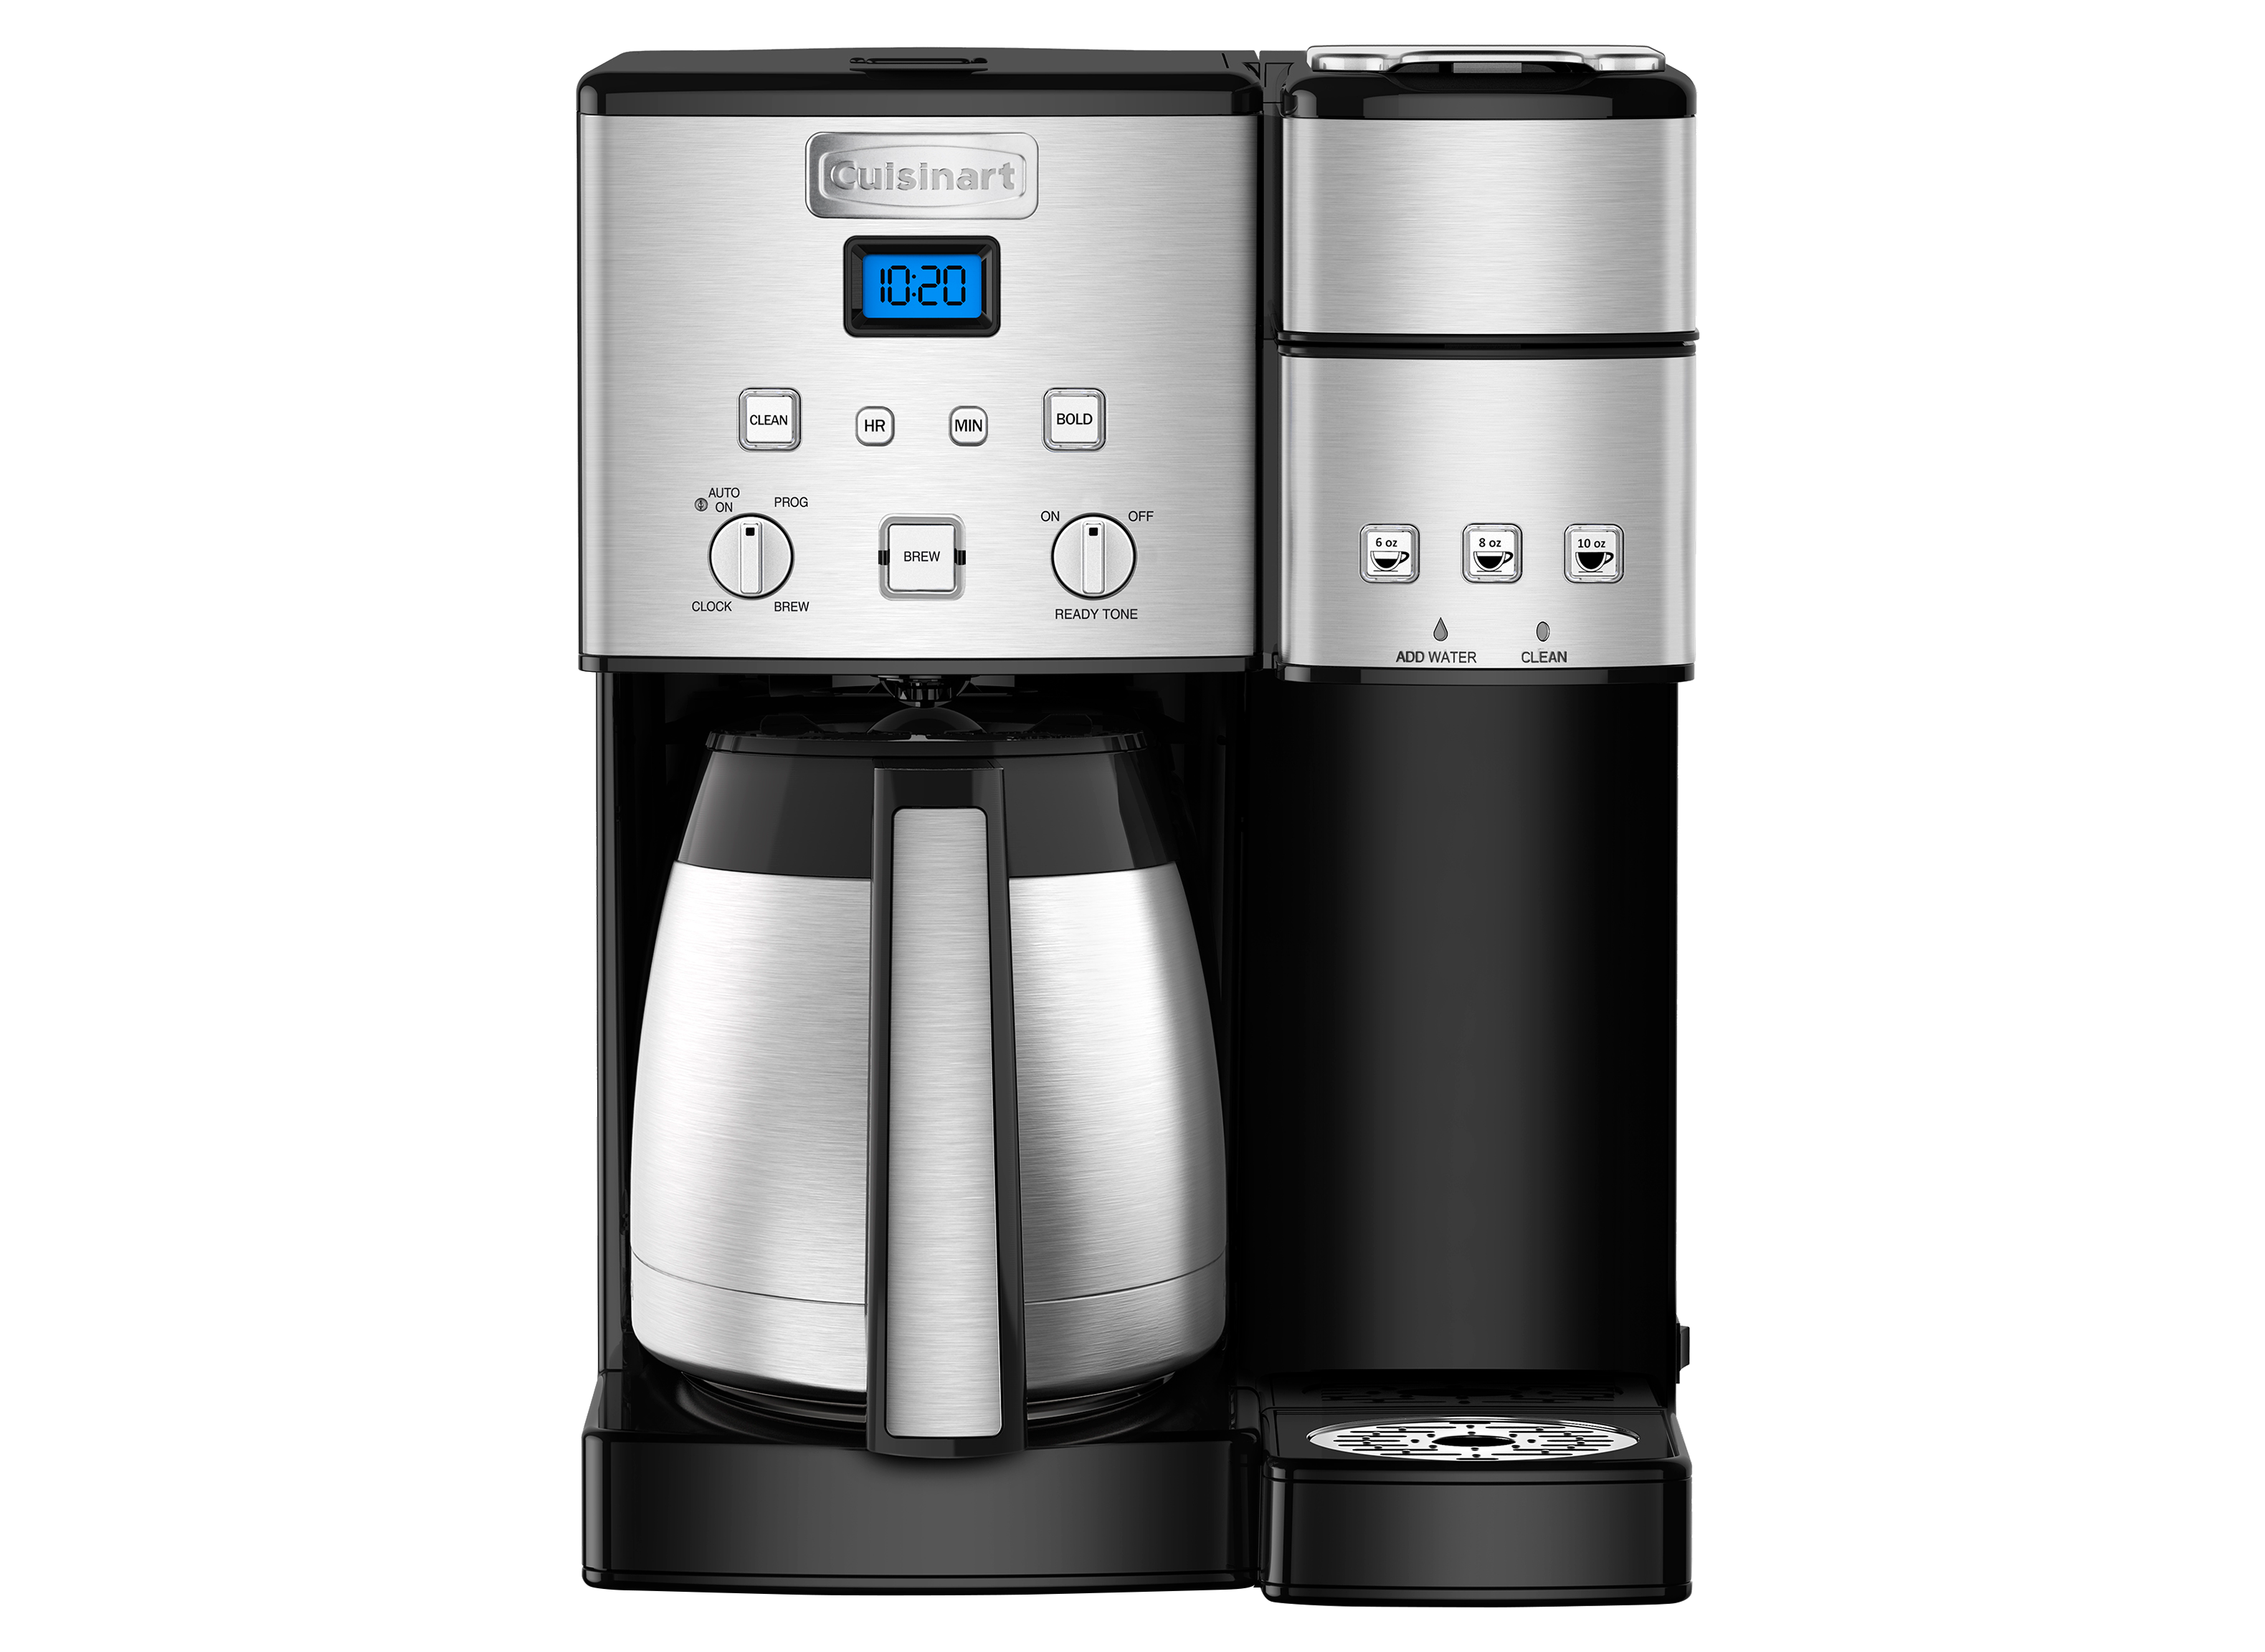 https://crdms.images.consumerreports.org/prod/products/cr/models/412811-dual-coffee-makers-cuisinart-coffee-center-thermal-ss-20-10037409.png